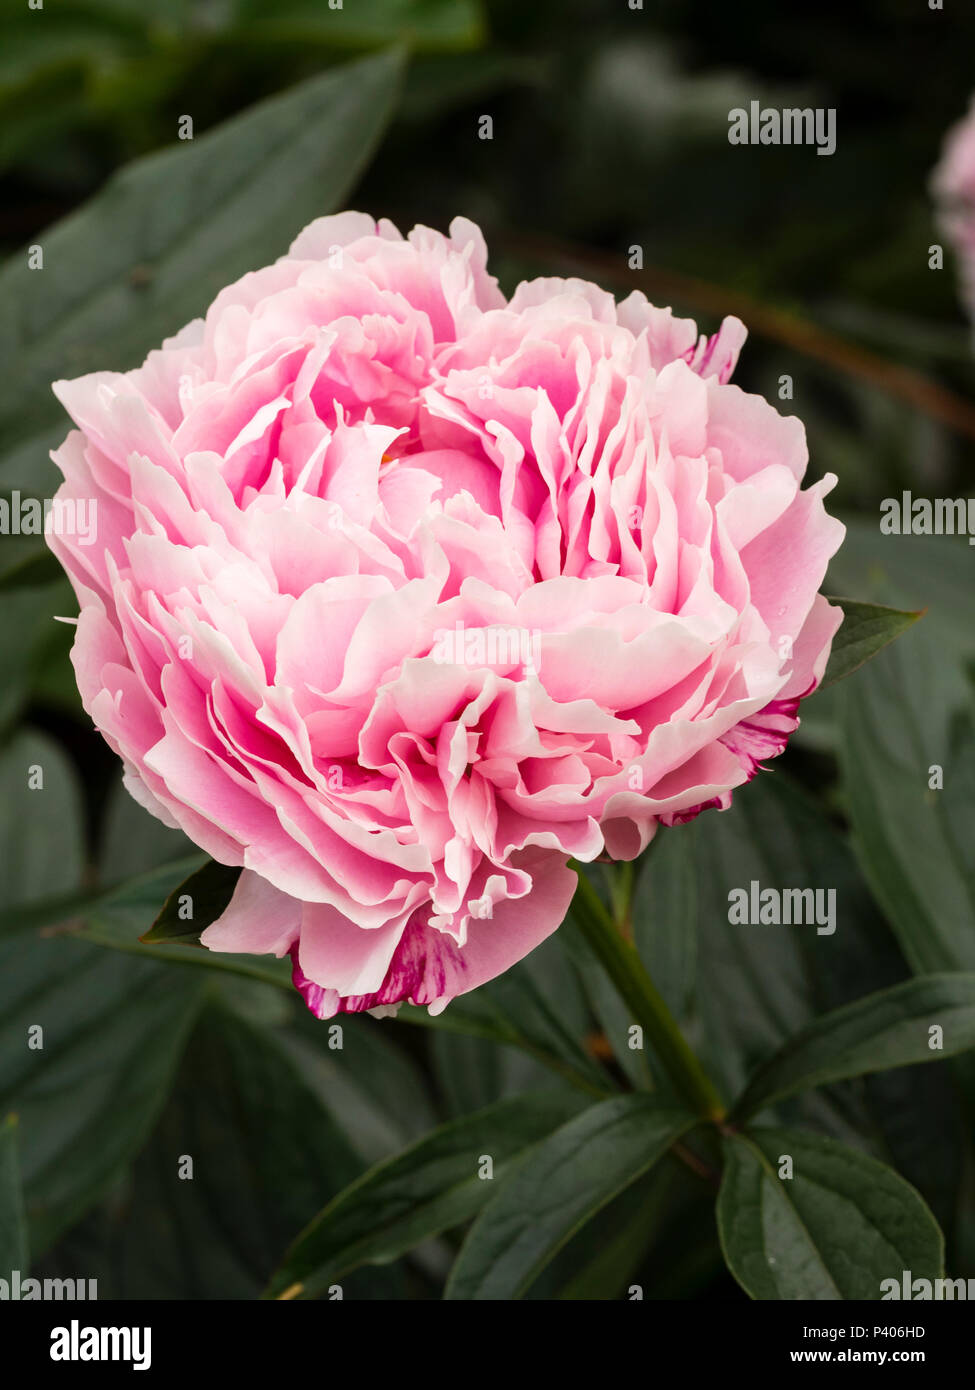 Heavily doubled fragrant pink flower of the early summer blooming herbaceous peony, Paeonia lactiflora 'Sarah Bernhardt' Stock Photo